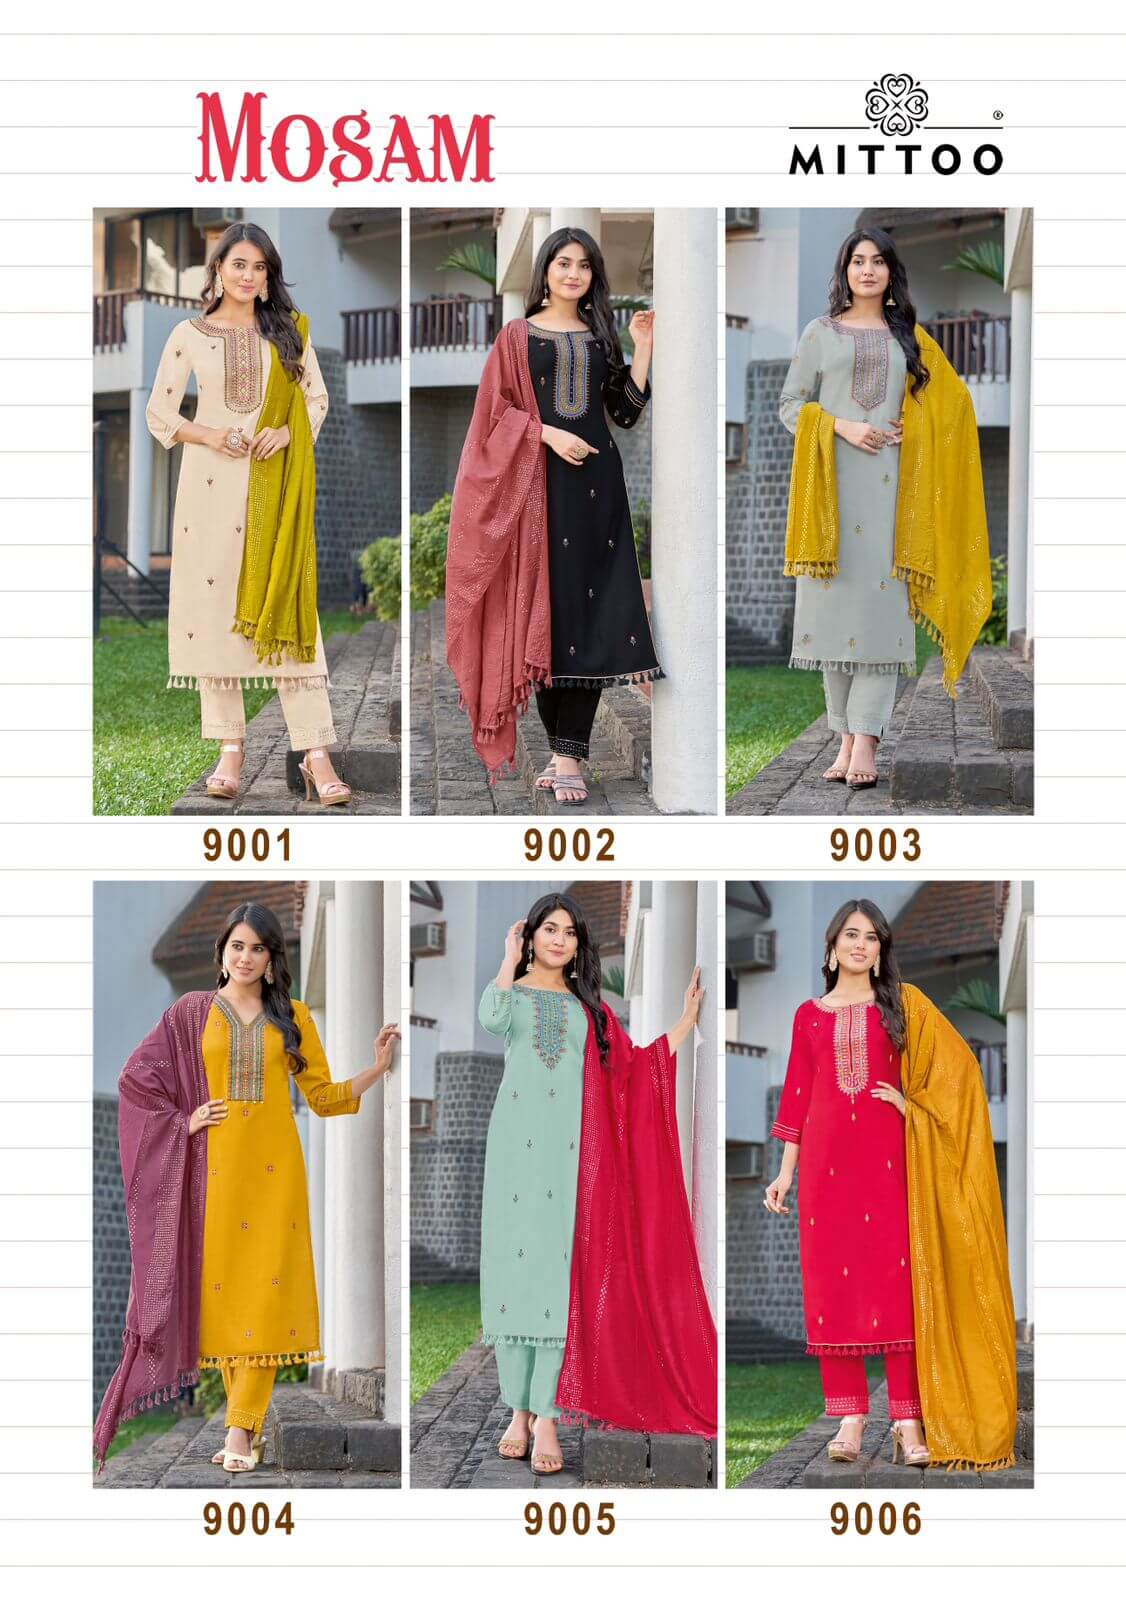 Mittoo Mosam Embroidery Salwar Kameez Catalog collection 10